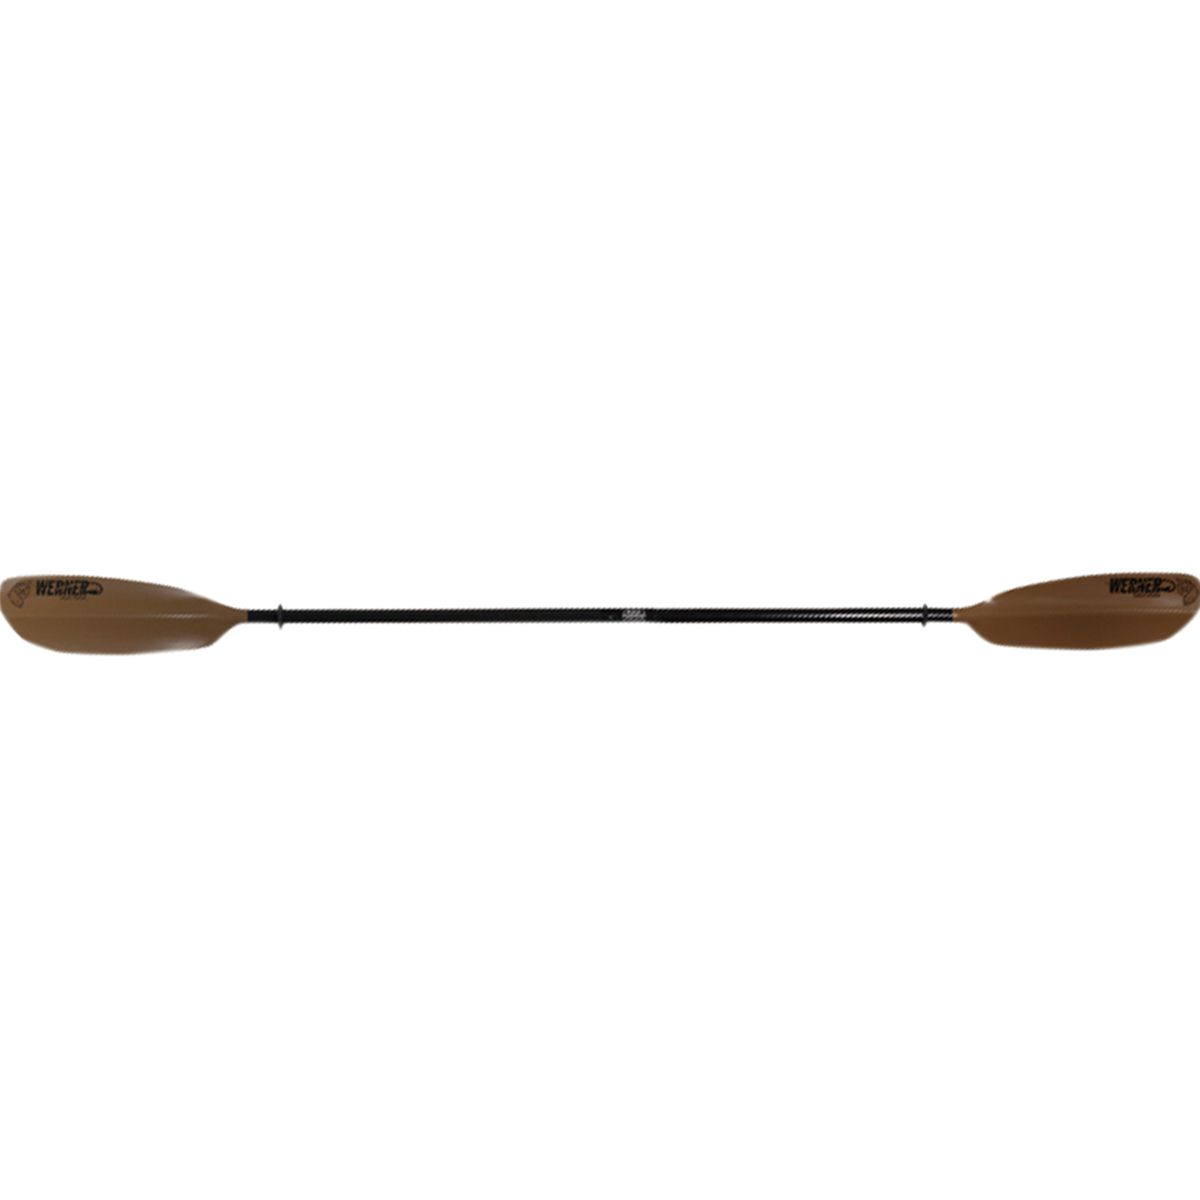 Werner Skagit Hooked 2-Piece Paddle - Straight Shaft